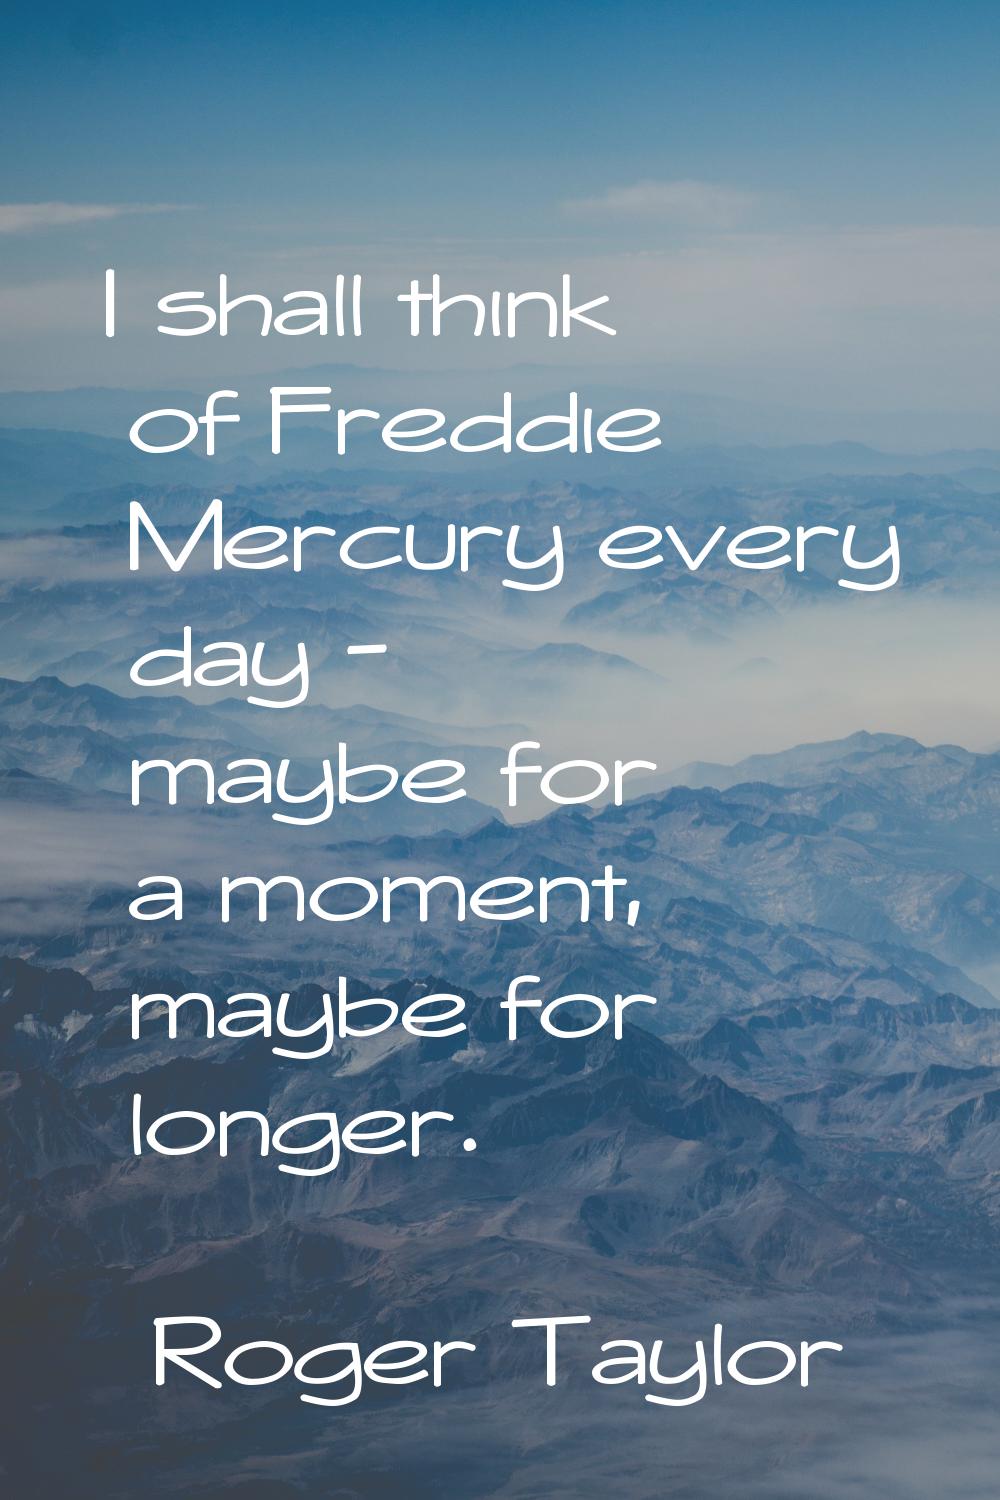 I shall think of Freddie Mercury every day - maybe for a moment, maybe for longer.